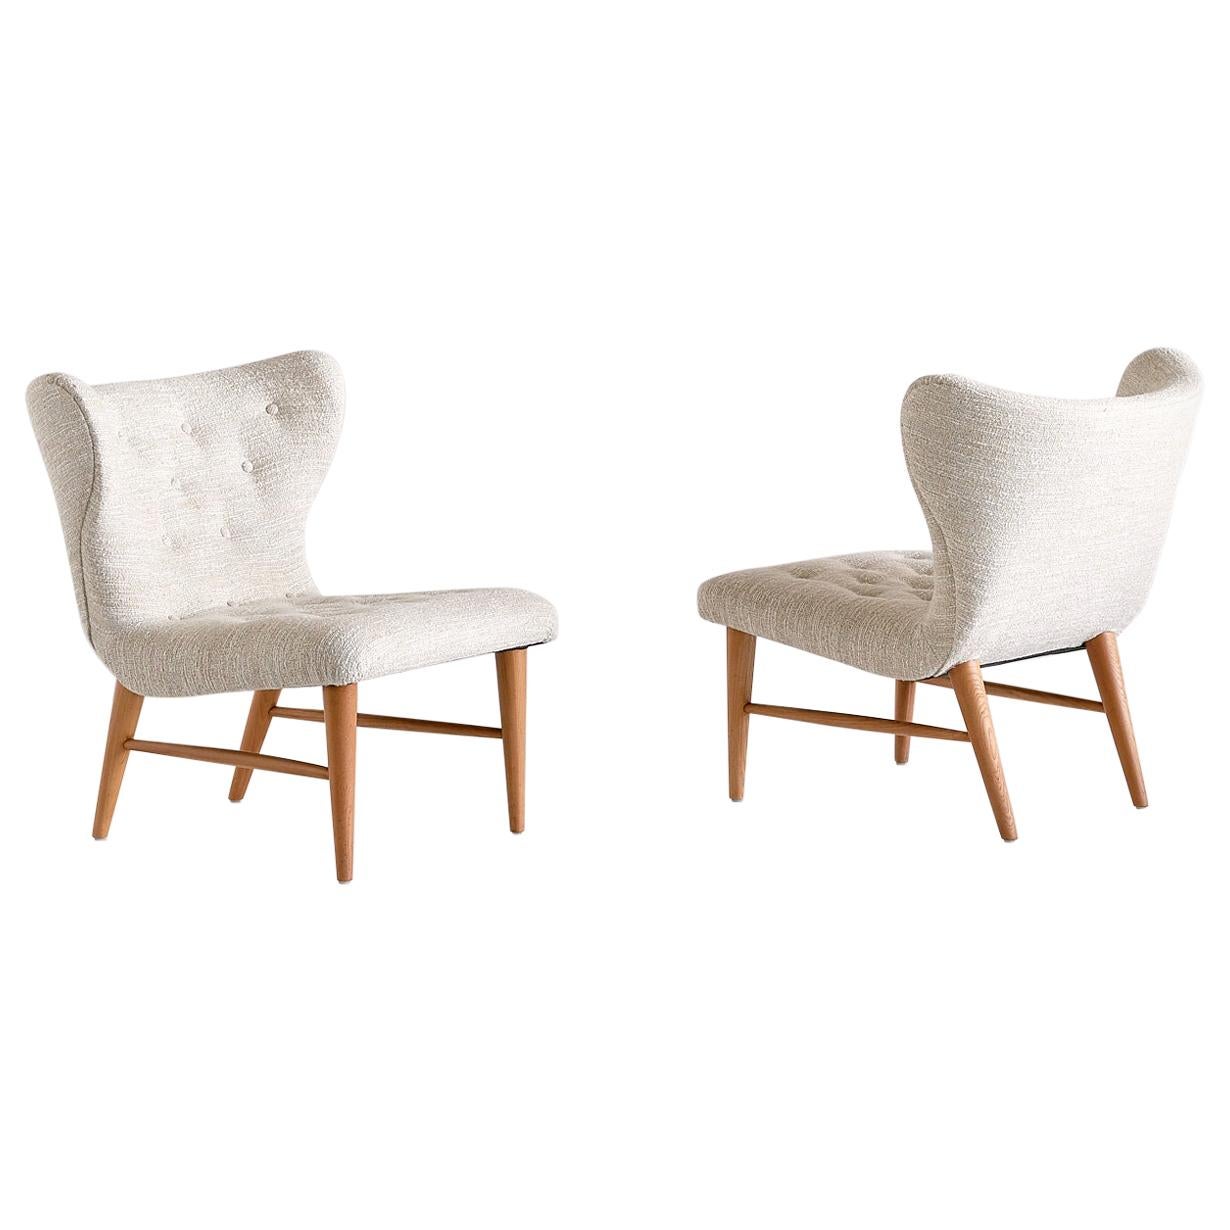 Eric Bertil Karlén Pair of Lounge Chairs, Sweden, 1940s